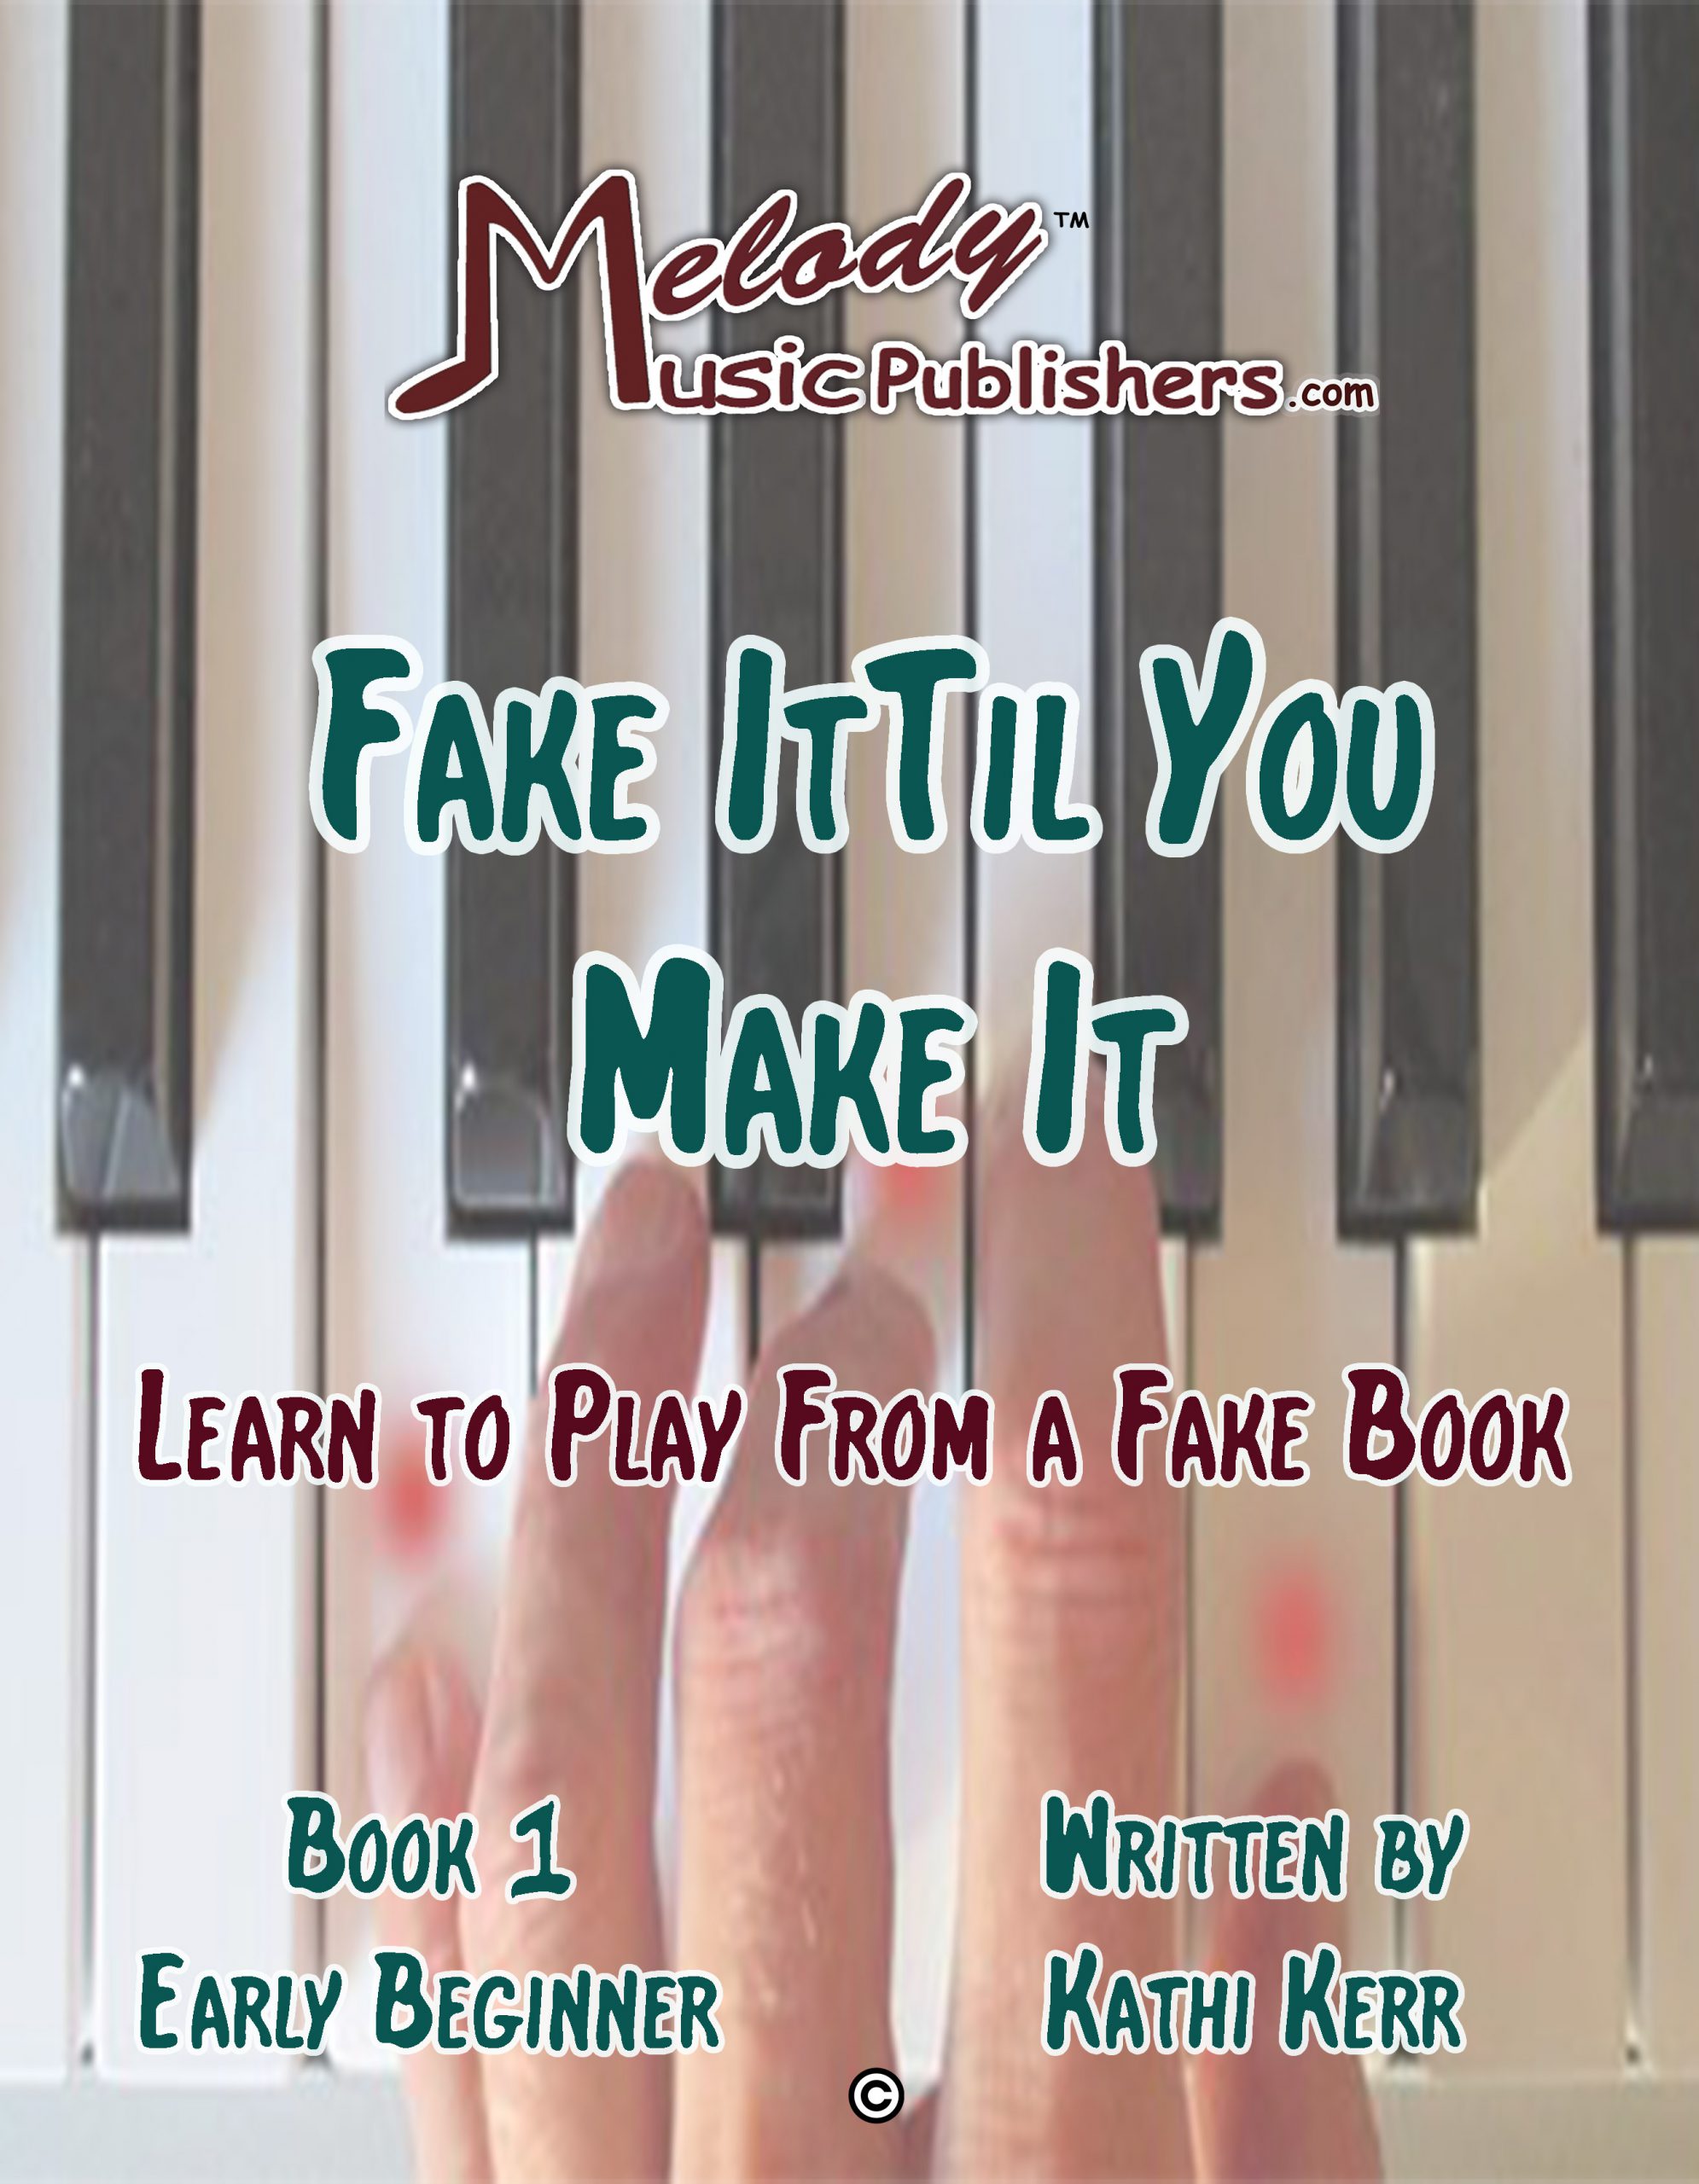 Fake It Til You Make It-Play Easy Songs On the Piano Book 1 - Piano Books  and Sheet Music